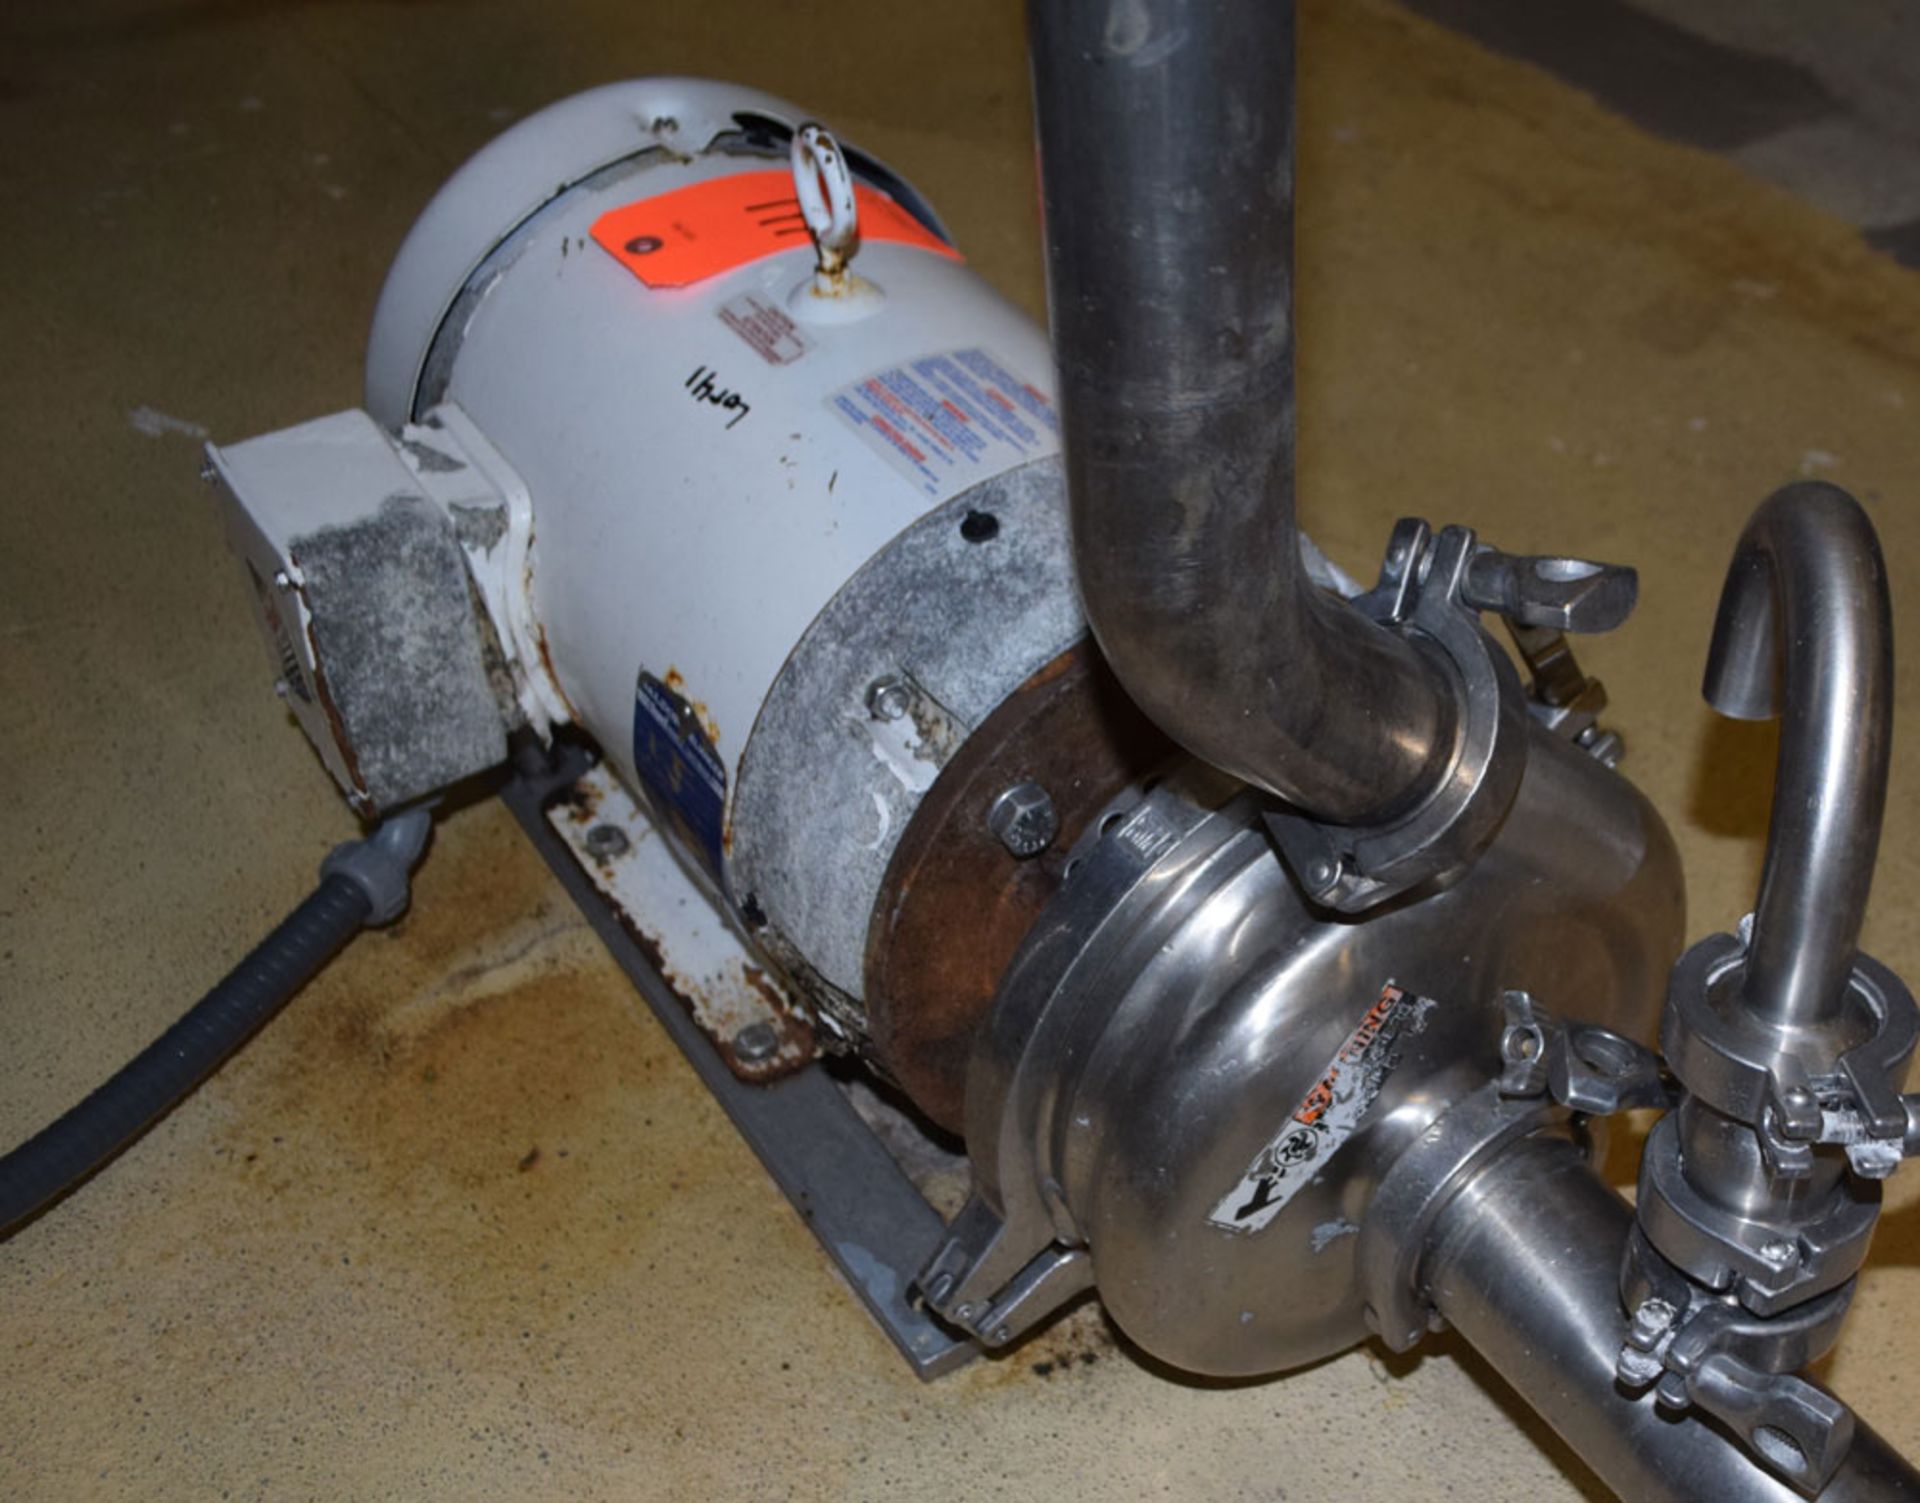 Waukesha 2065 Stainless Steel Centrifugal Pump with 10 HP Motor; s/n: 332051 (2003) - Location in